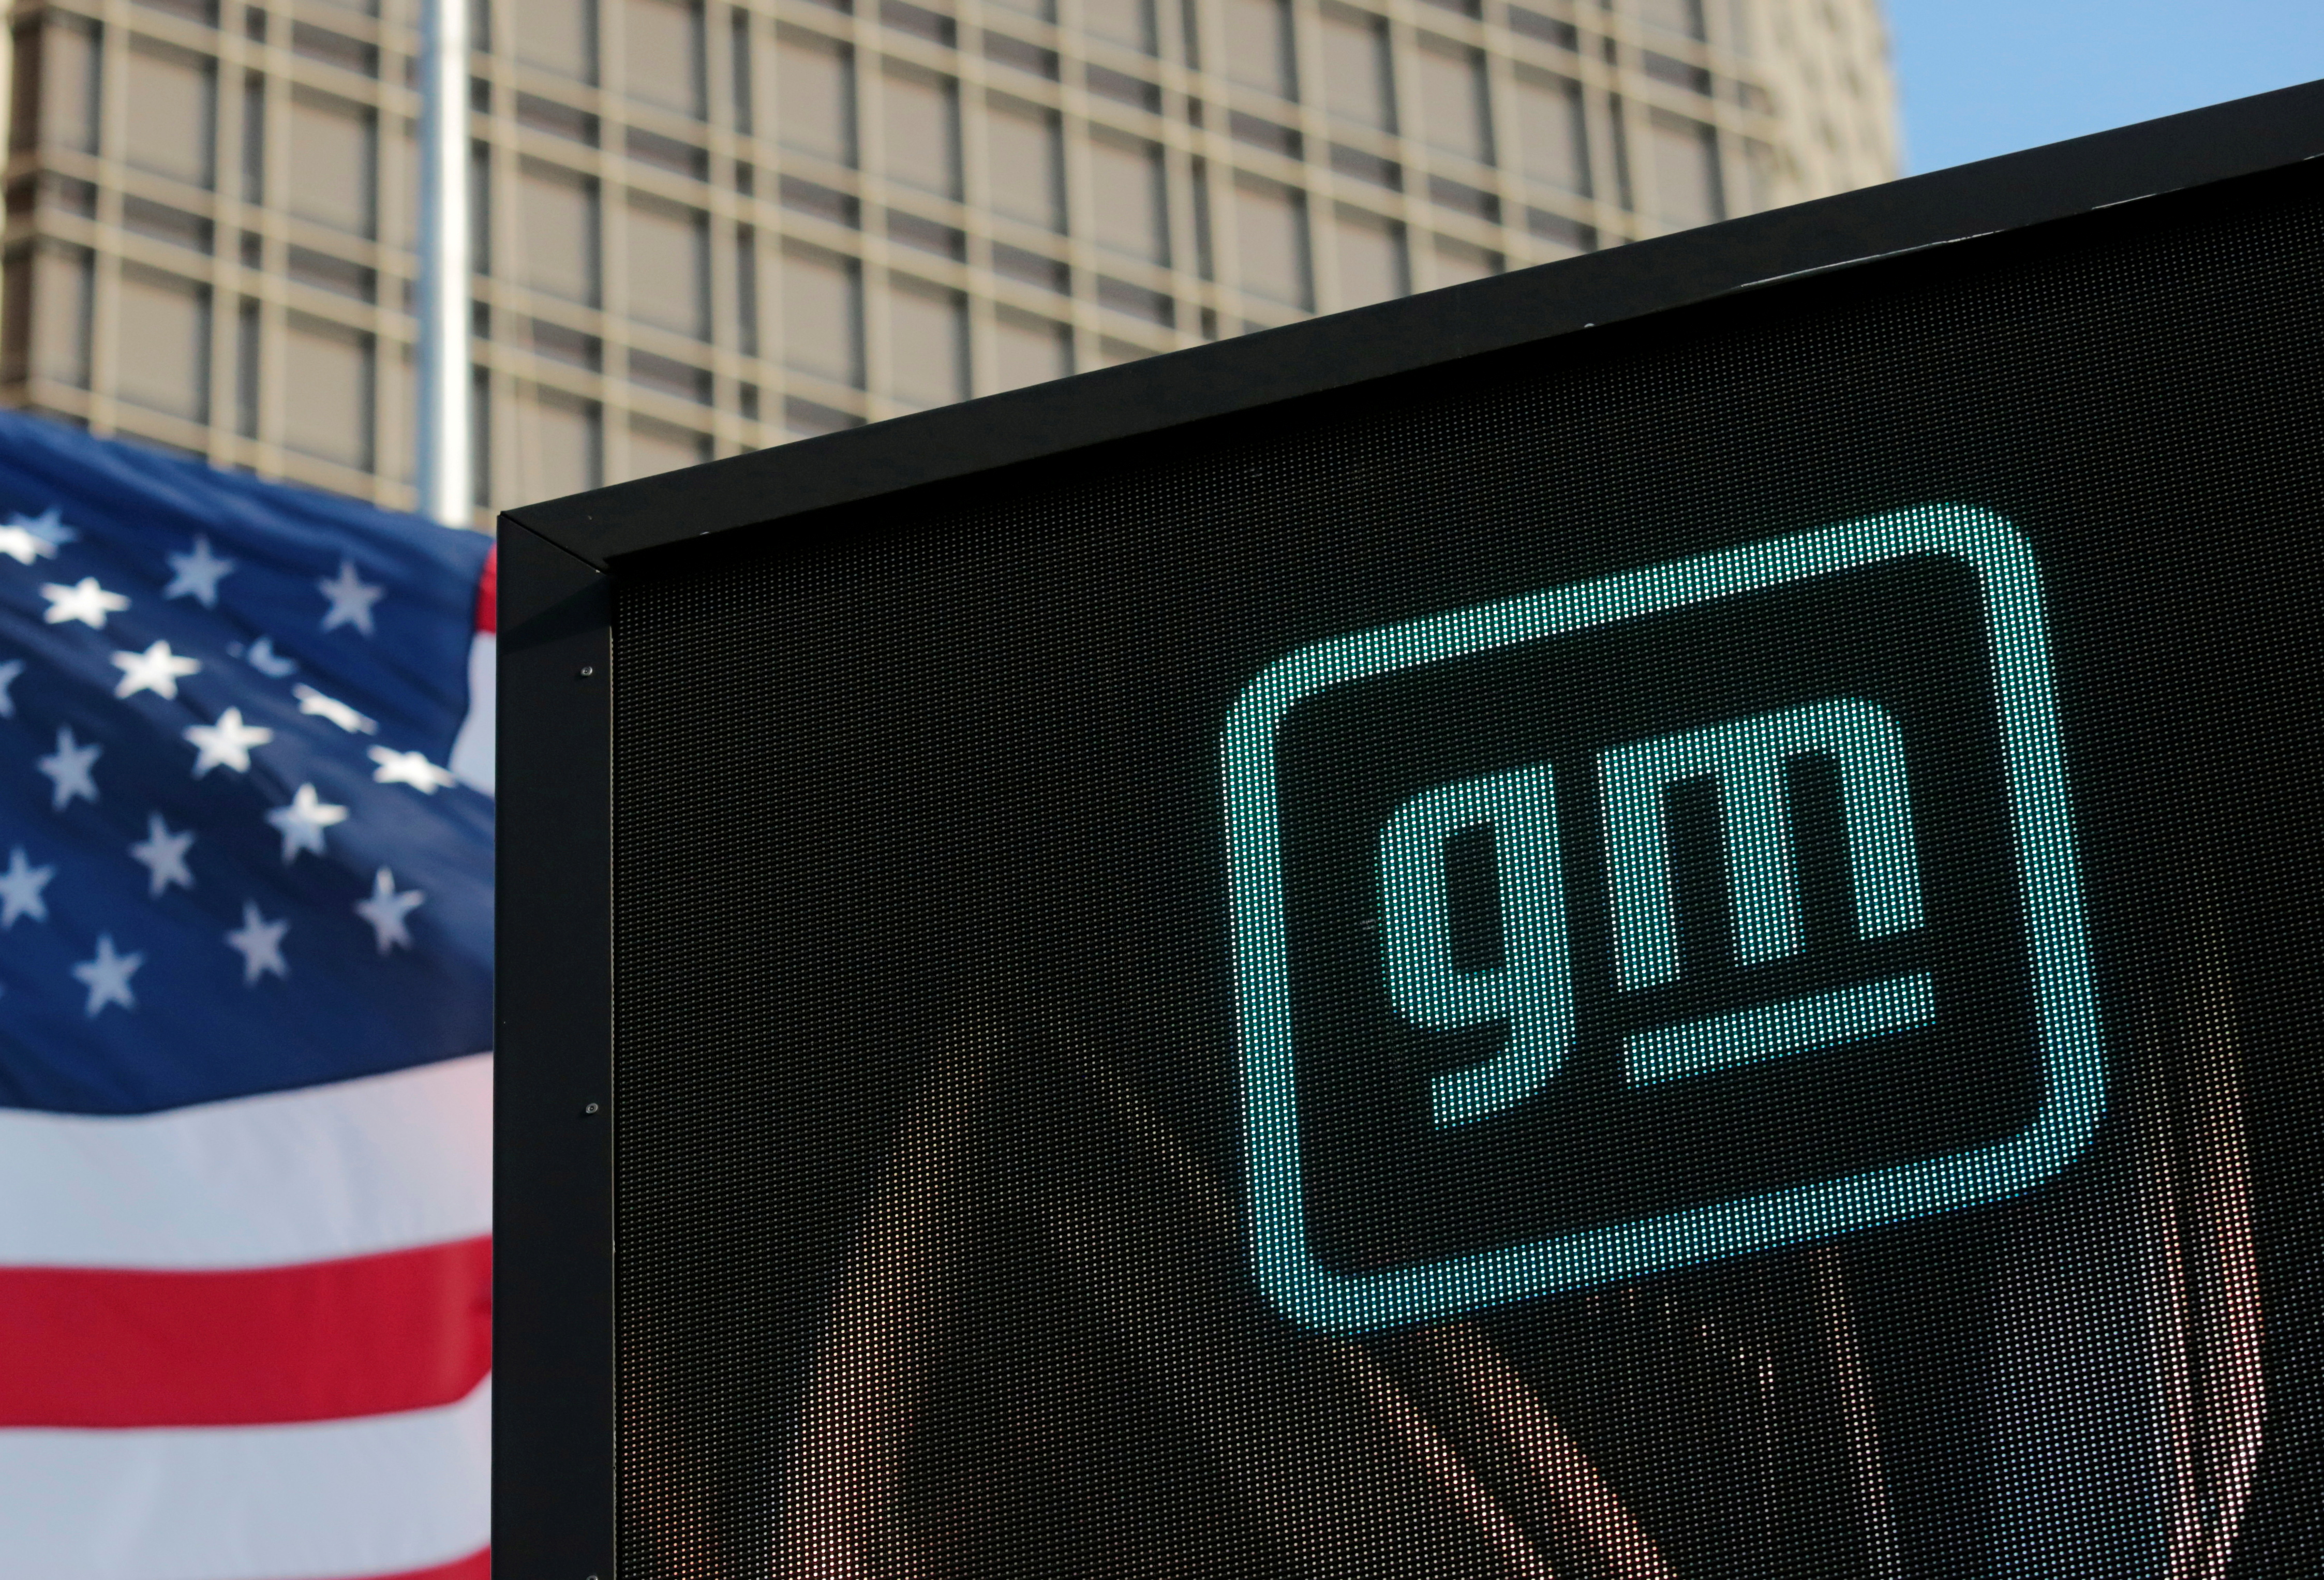 The new GM logo is seen on the facade of the General Motors headquarters in Detroit, Michigan, U.S., March 16, 2021. Picture taken March 16, 2021.  REUTERS/Rebecca Cook/File Photo